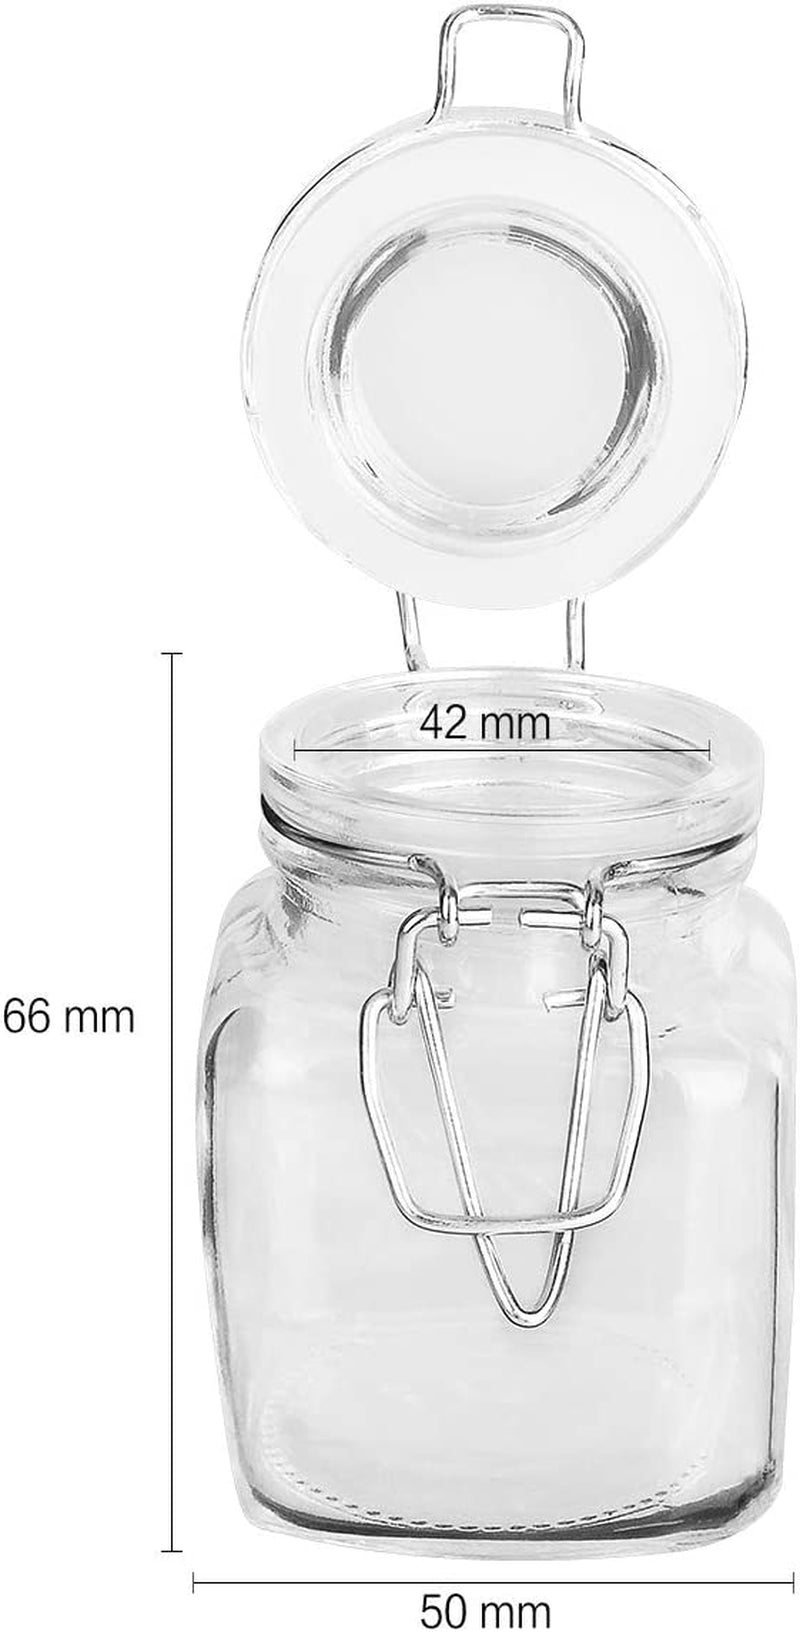 Glass Jars with Lids, KAMOTA 30 Pack of 3.5 Oz Small Glass Jars for Storage Spice Herbal Condiments with Leak-Proof Rubber Gaskets and Airtight Hinged Lids, 280 Labels and 2 Silicone Funnels